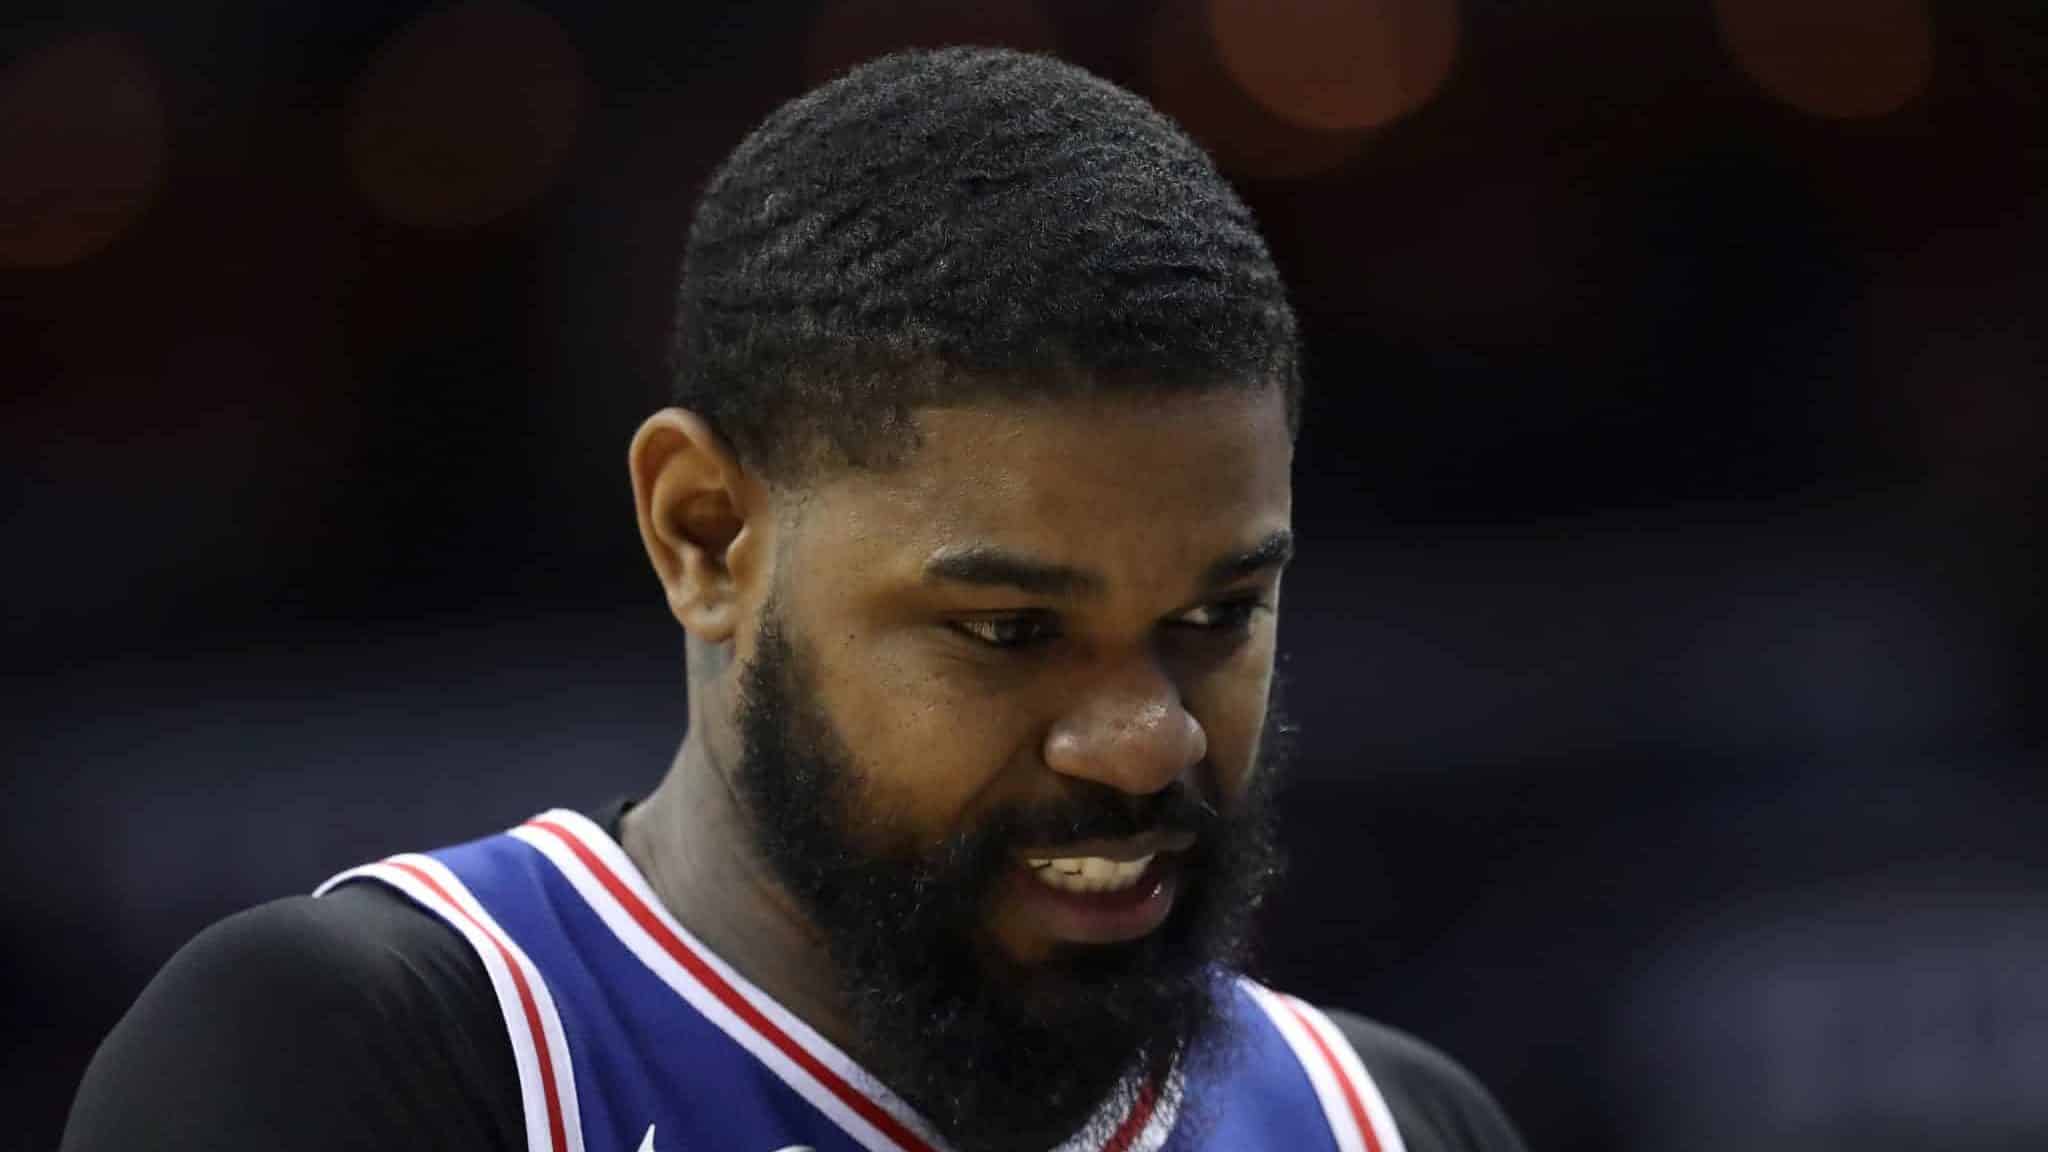 WASHINGTON, DC - OCTOBER 18: Amir Johnson #5 of the Philadelphia 76ers walks off the court after fouling out against the Washington Wizards at Capital One Arena on October 18, 2017 in Washington, DC. NOTE TO USER: User expressly acknowledges and agrees that, by downloading and or using this photograph, User is consenting to the terms and conditions of the Getty Images License Agreement.